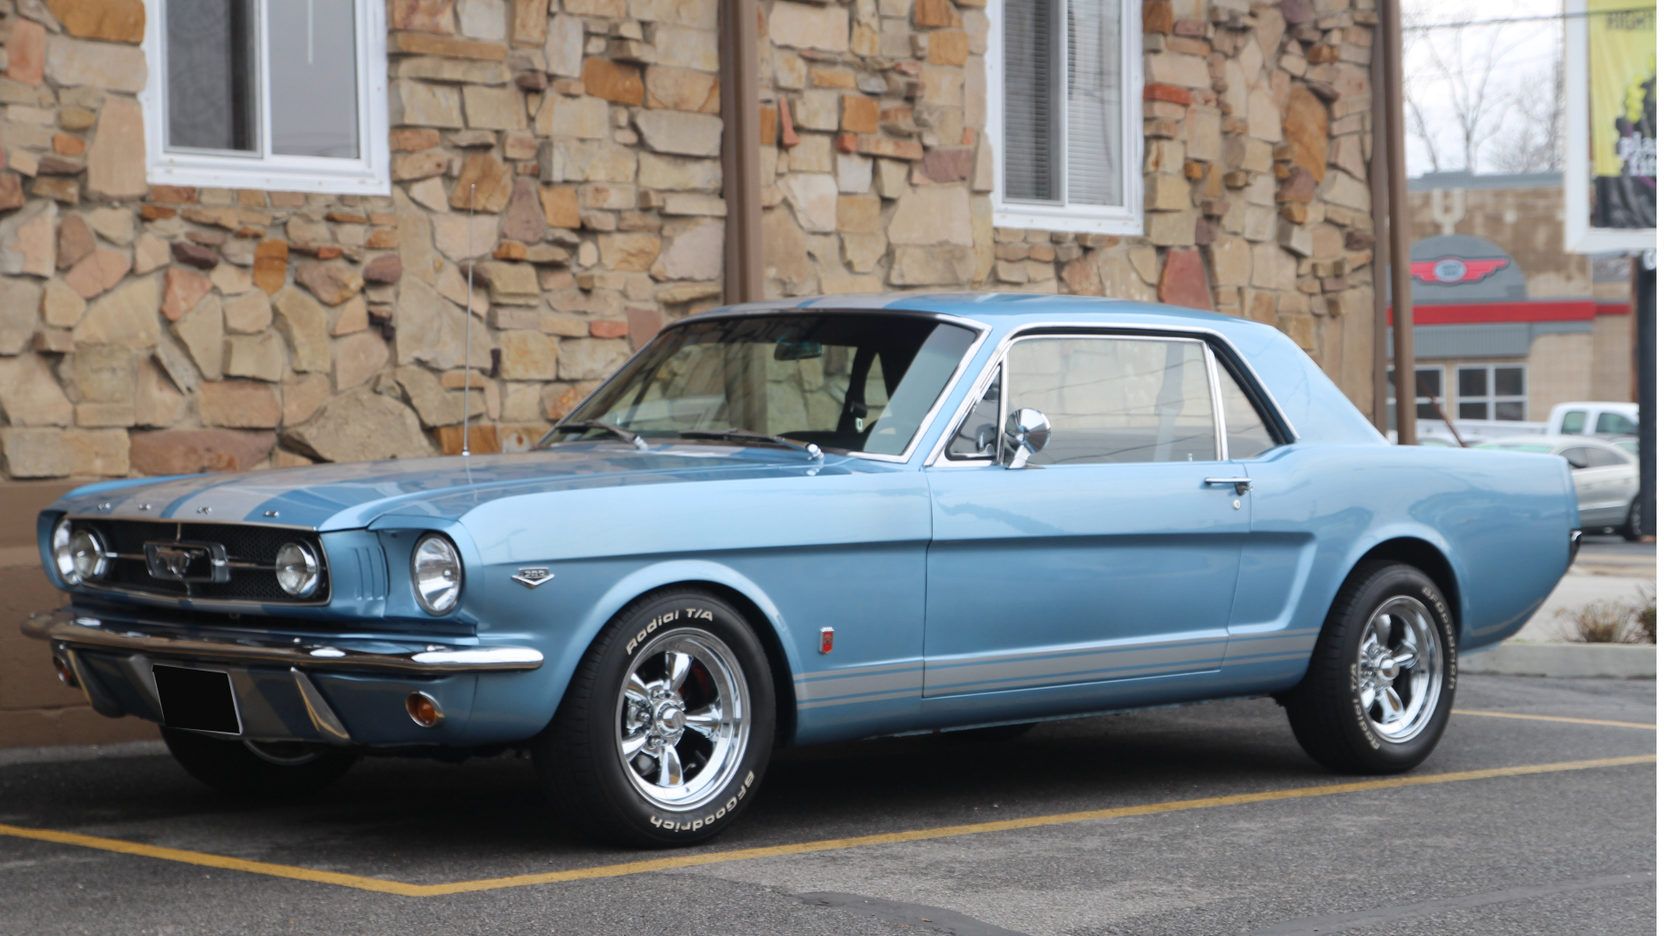 Silver Blue 1965 Ford Mustang